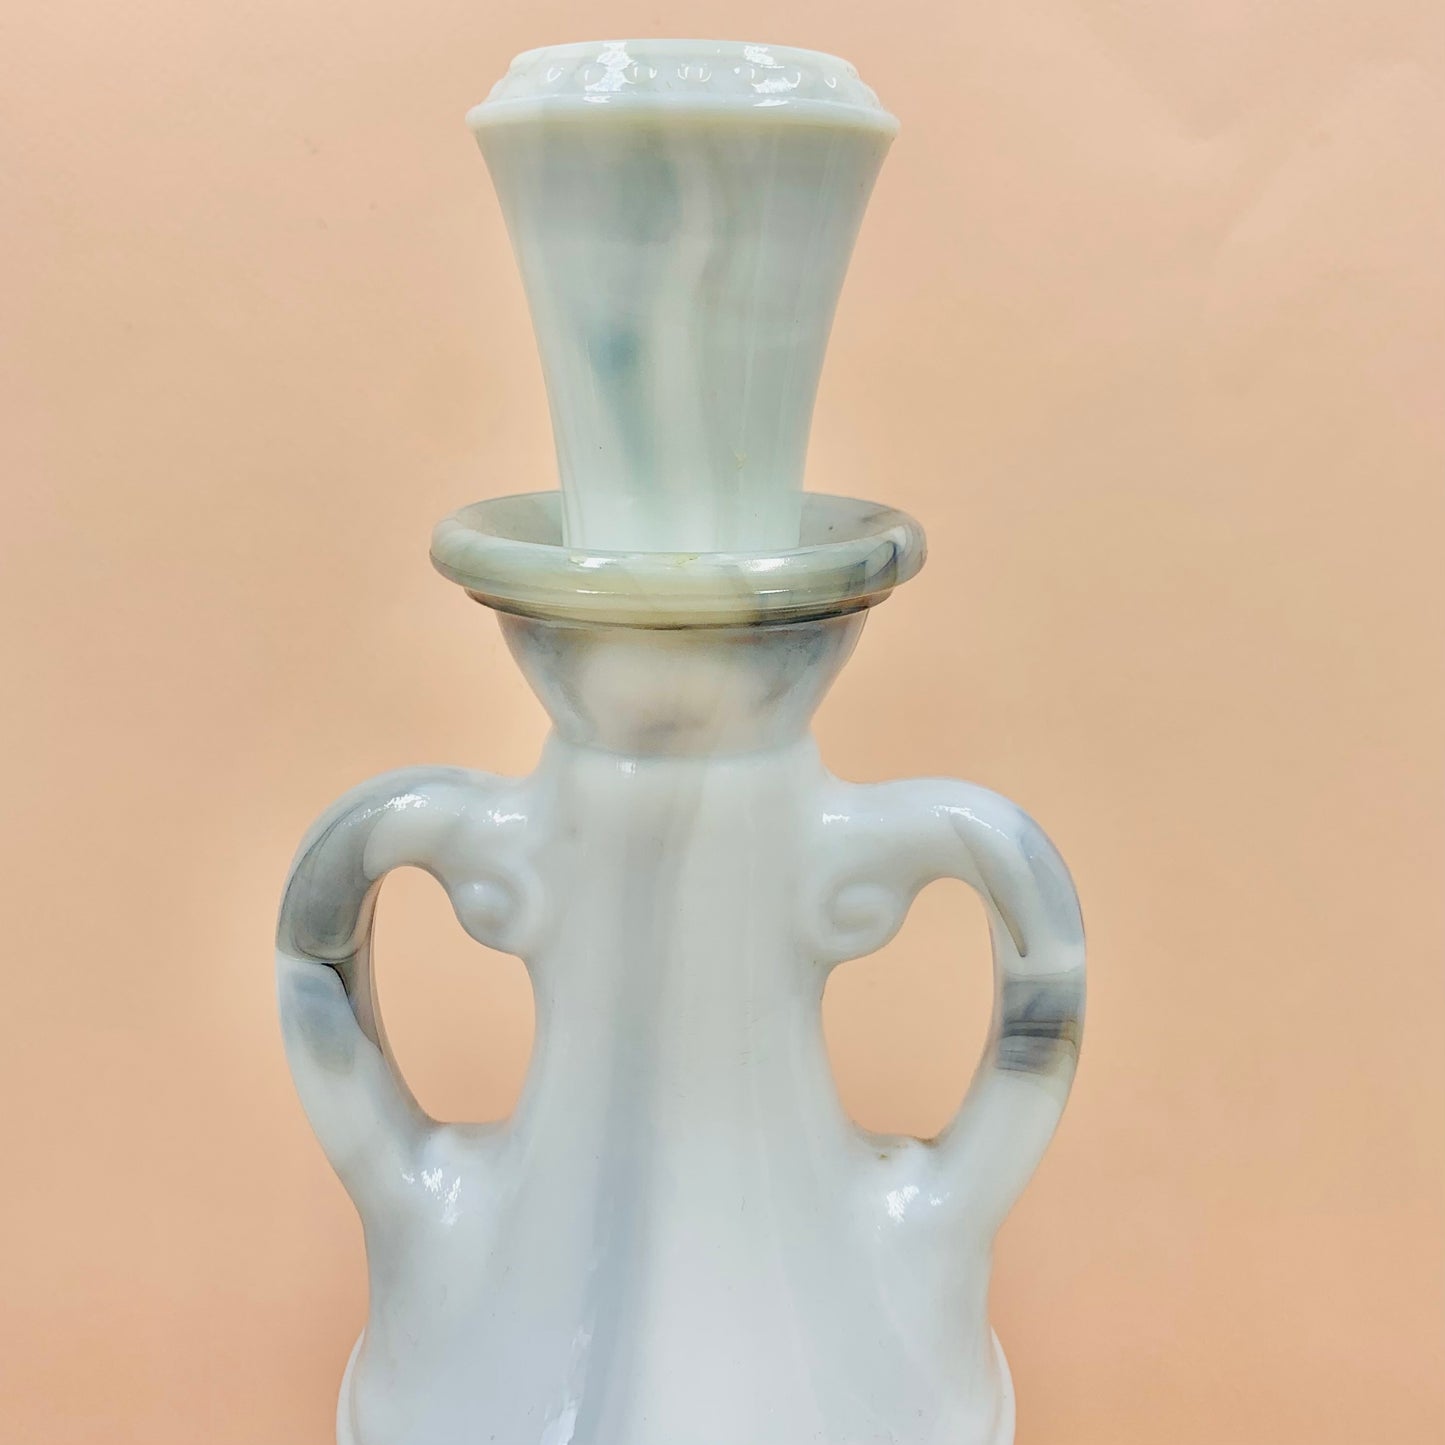 Vintage 1970s Jim Beam marble milk glass decanter for Beam’s Choice Olympic series